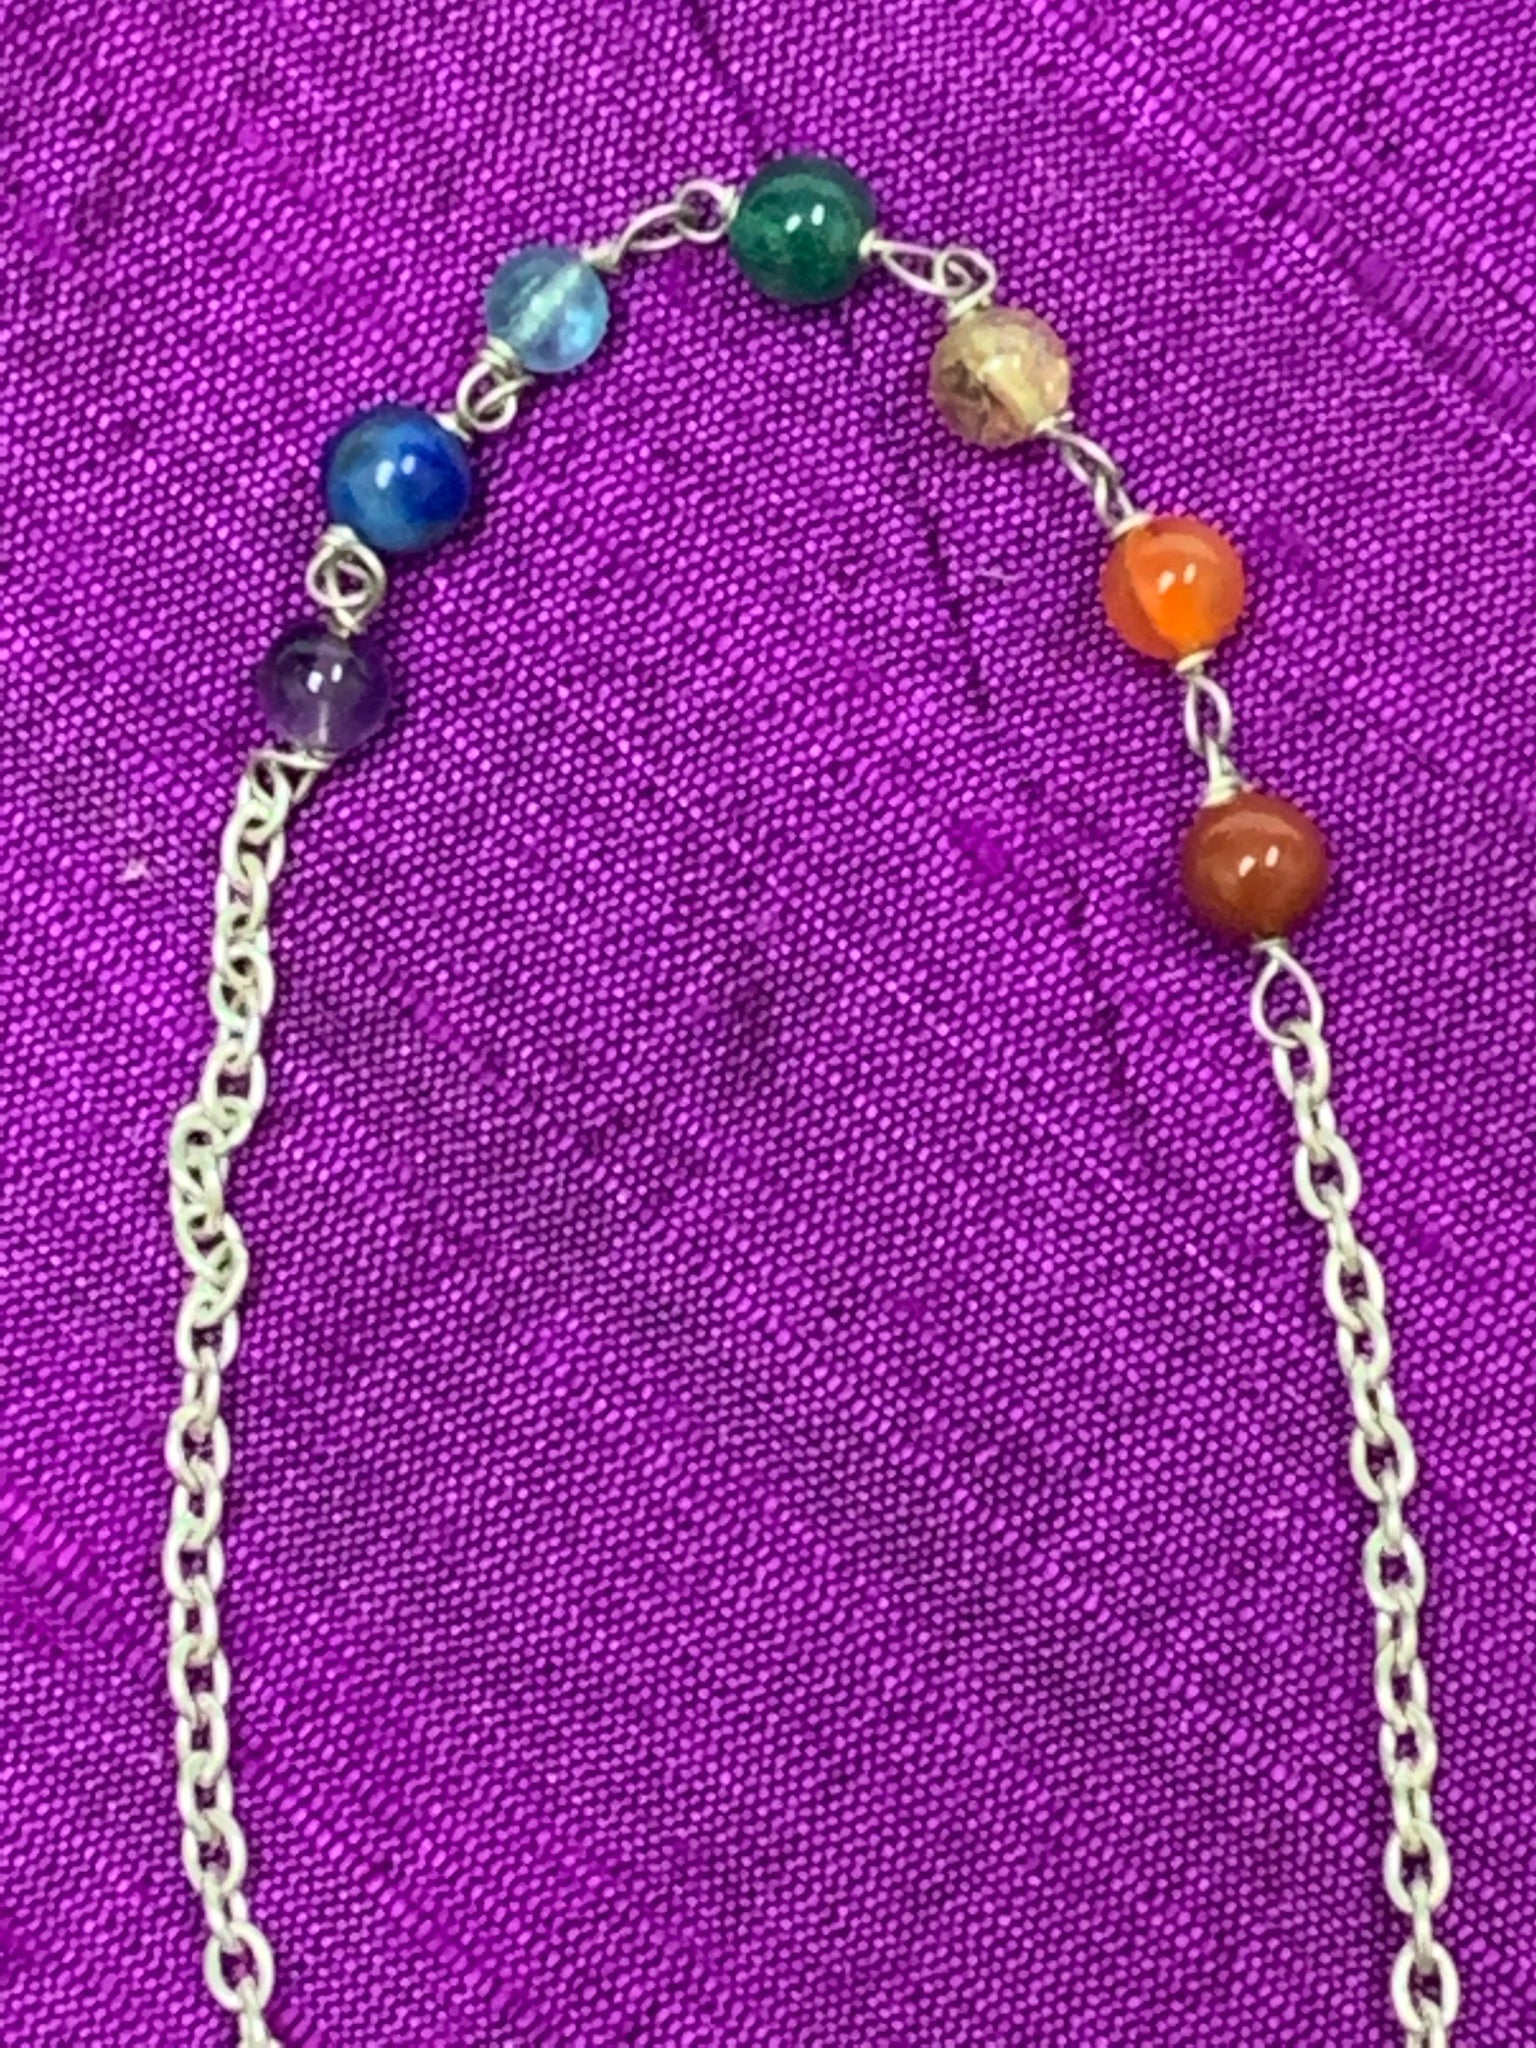 Close-up view of the 7 chakra beads on the pendulum's chain.